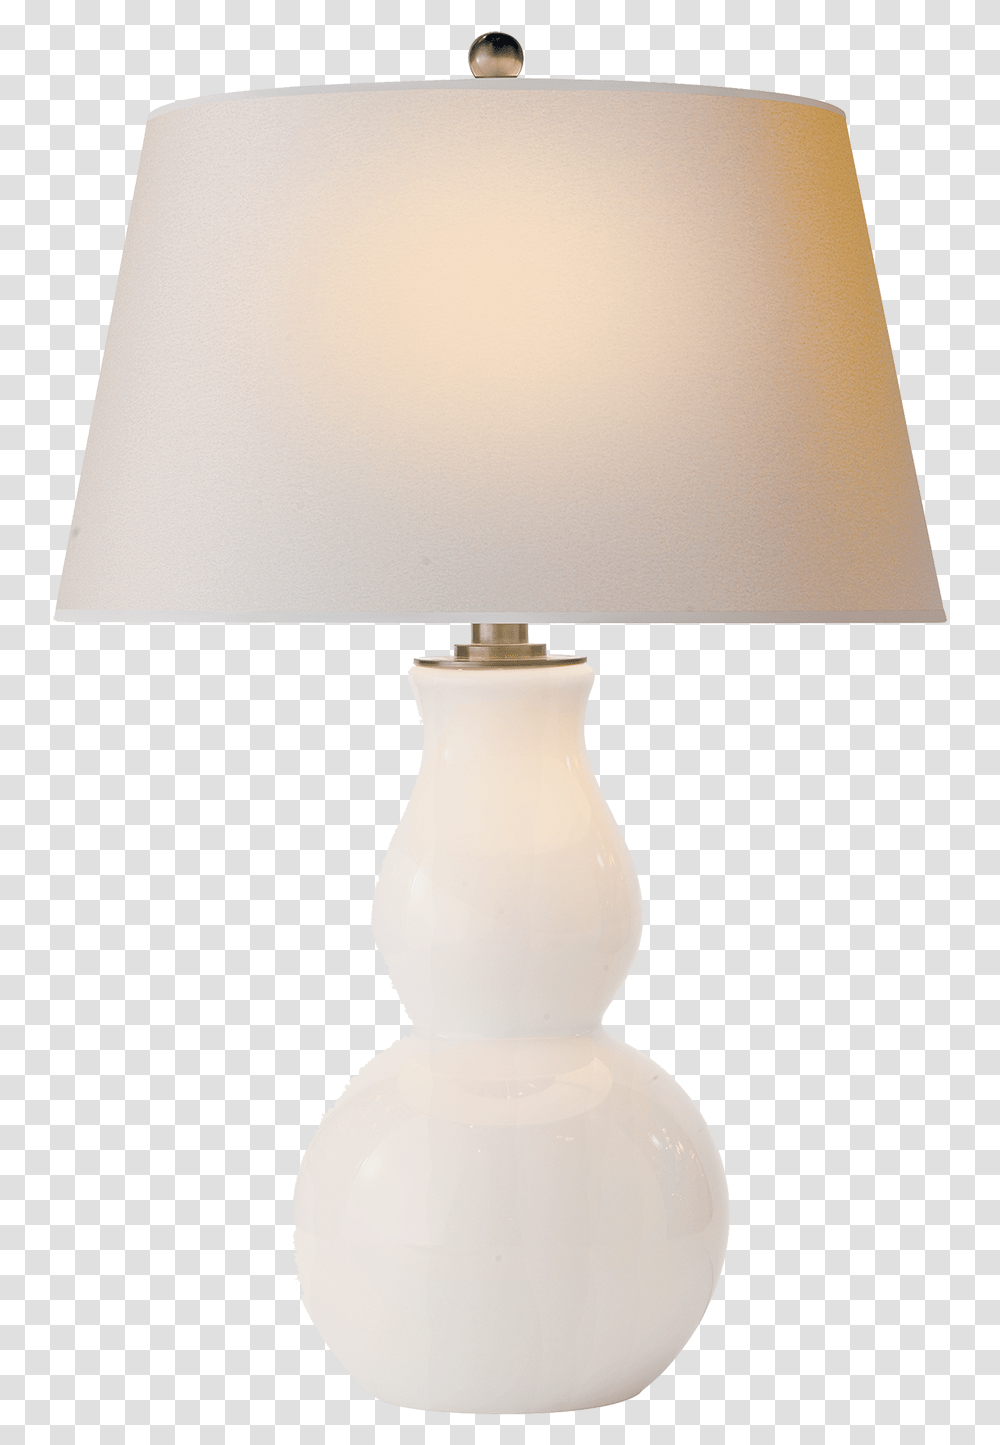 White Glass Table LampClass Lazyload Lazyload Fade White Base Lamp, Lampshade, Snowman, Winter, Outdoors Transparent Png